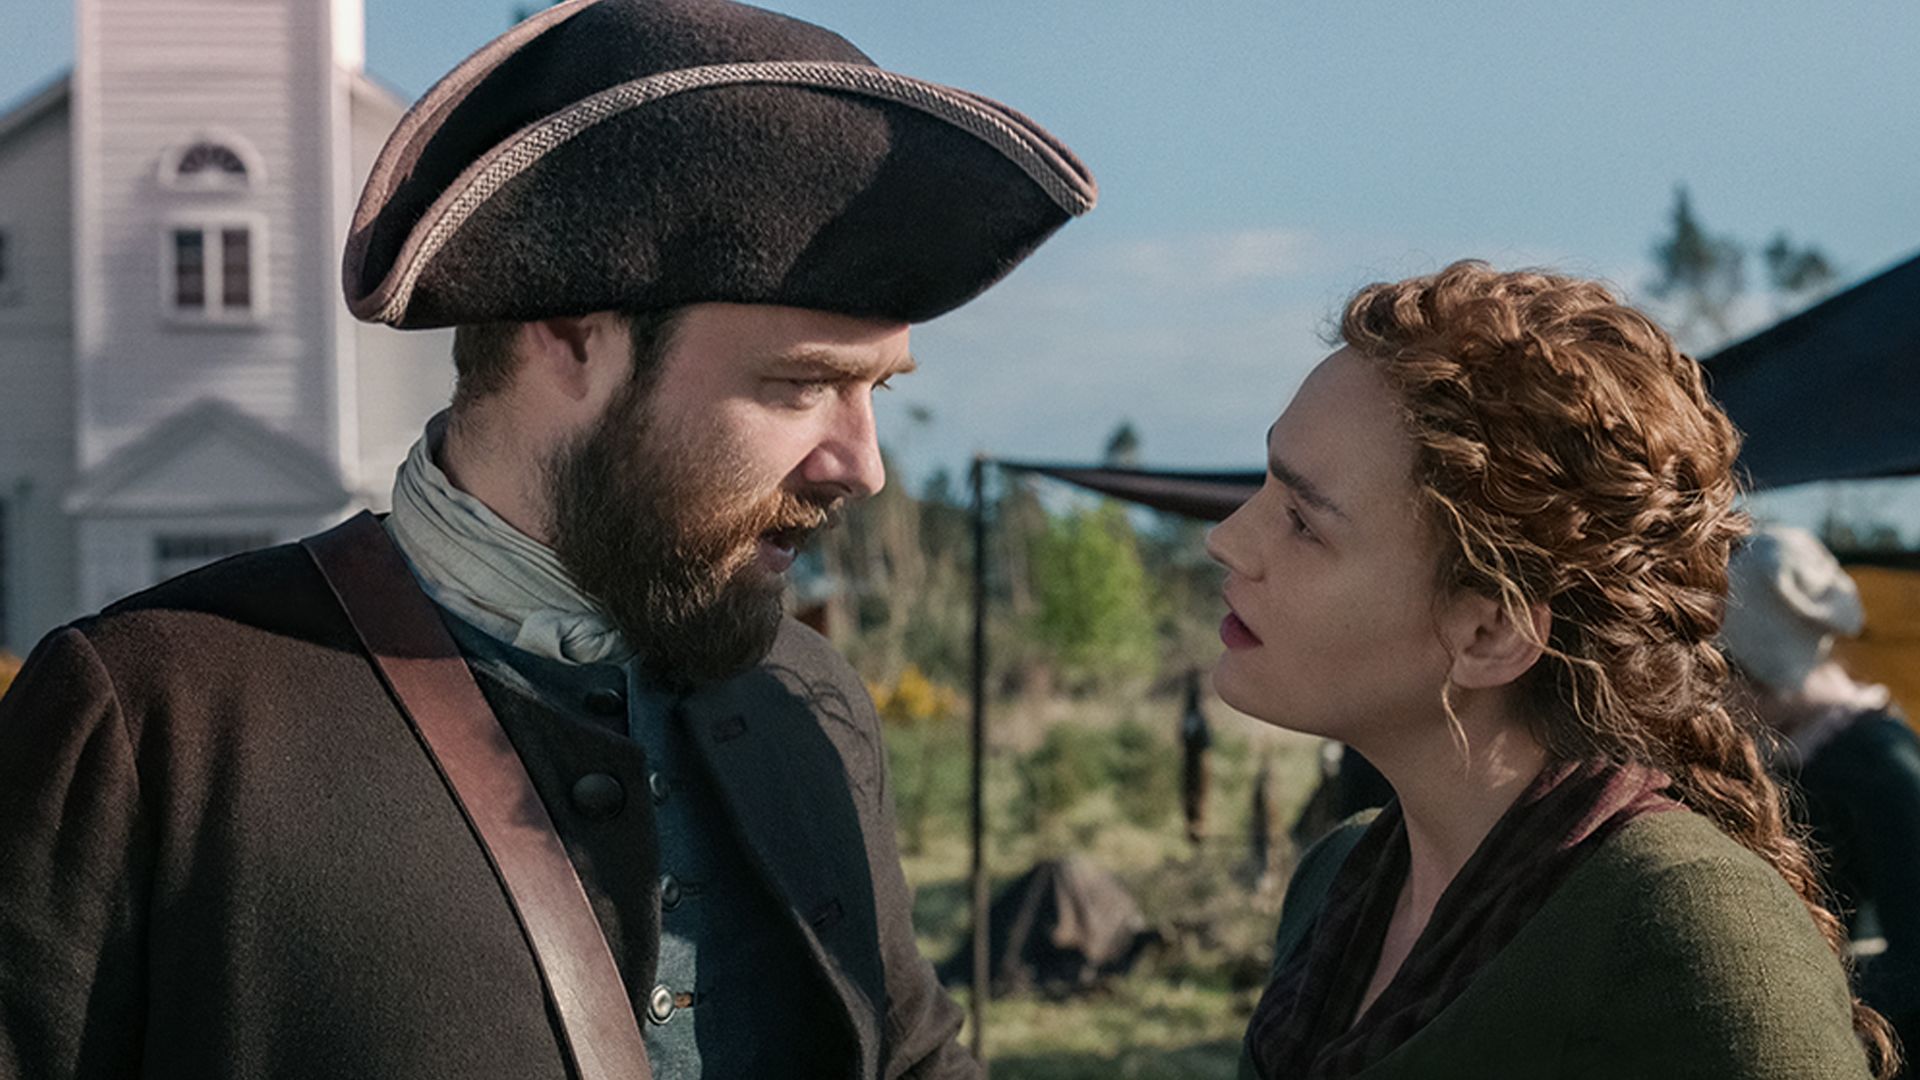 Brianna and Roger in Outlander